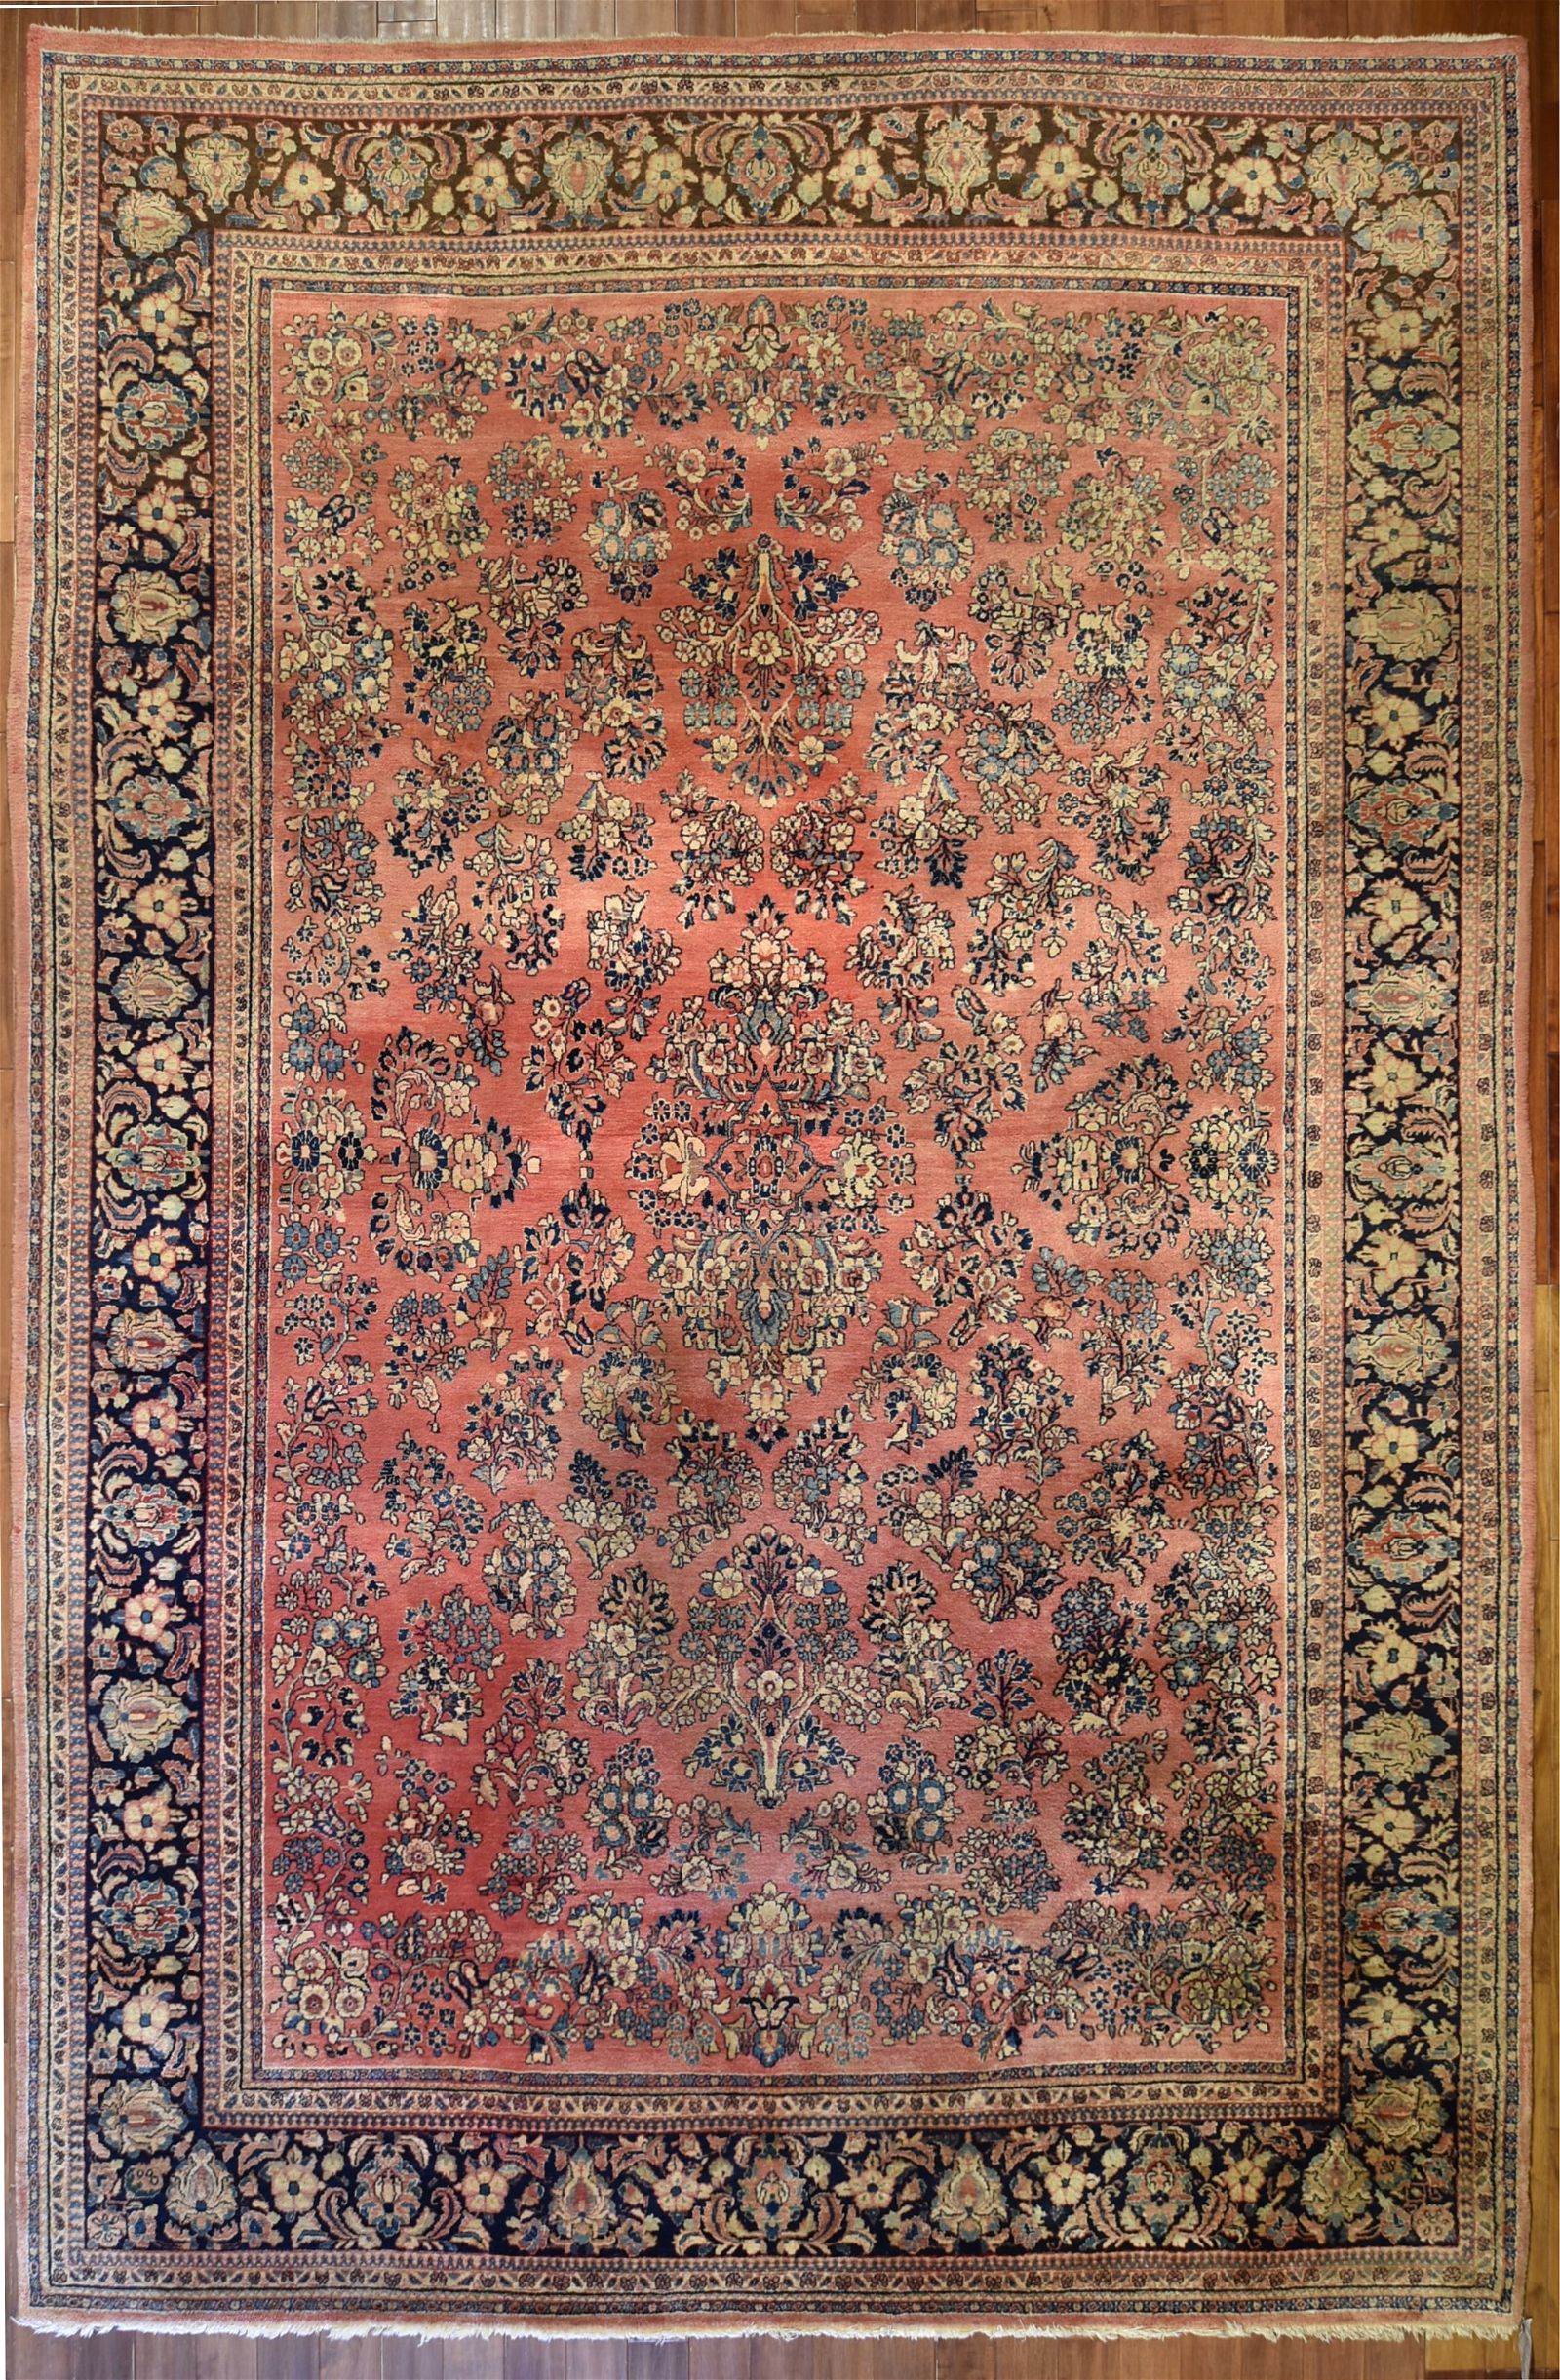 A SAROUK RUG, CENTRAL PERSIA, MID